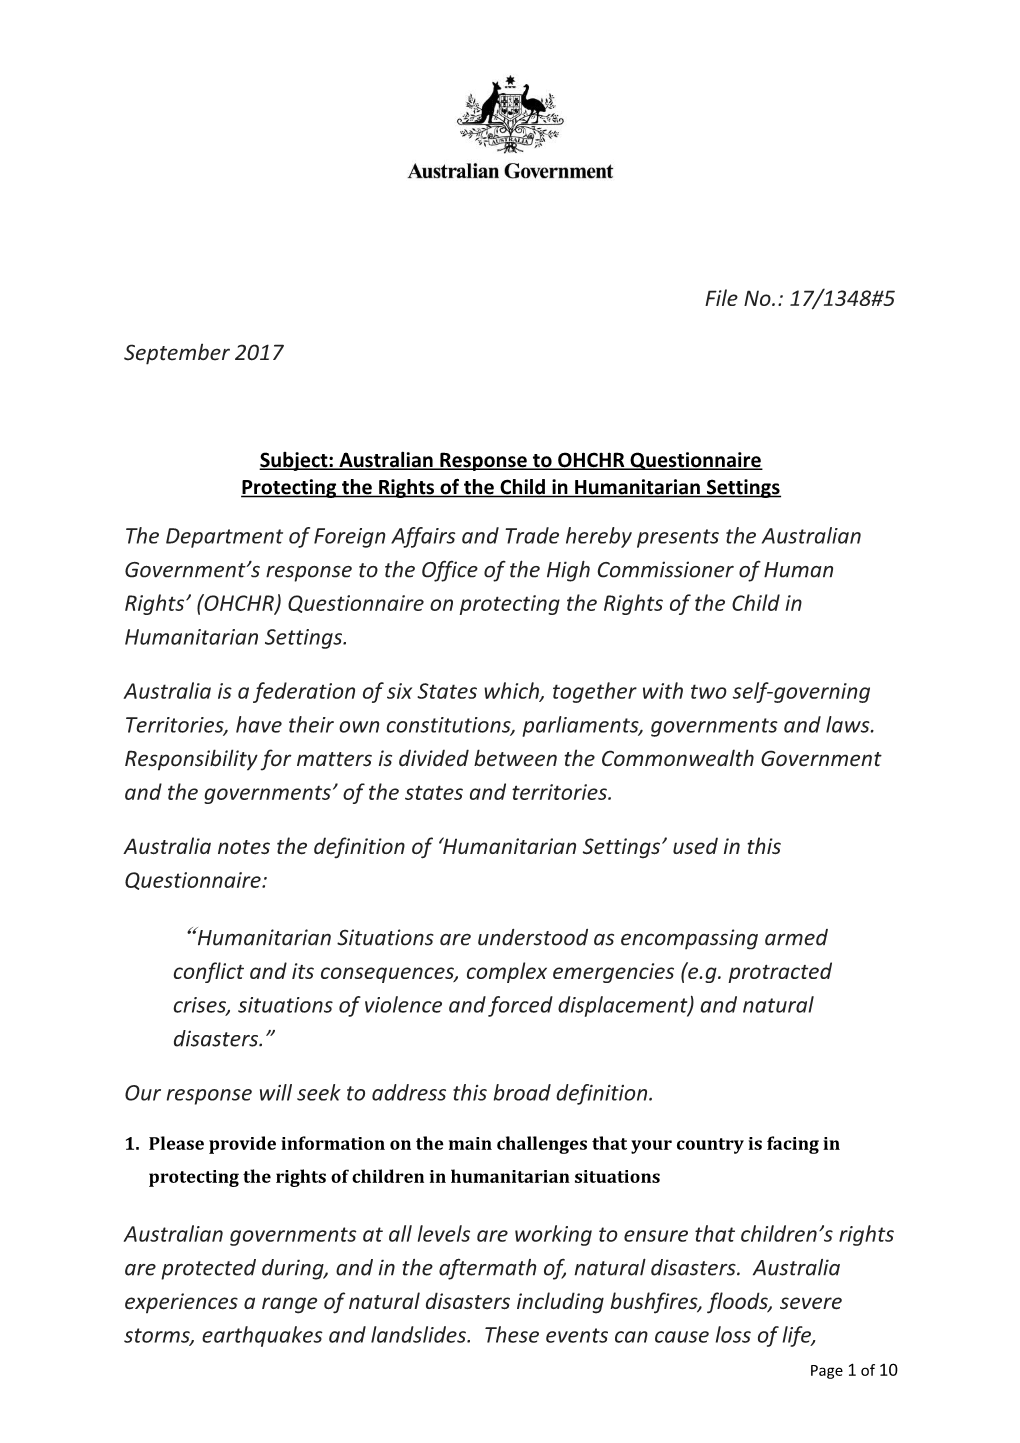 Subject: Australian Response to OHCHR Questionnaire Protecting the Rights of the Child